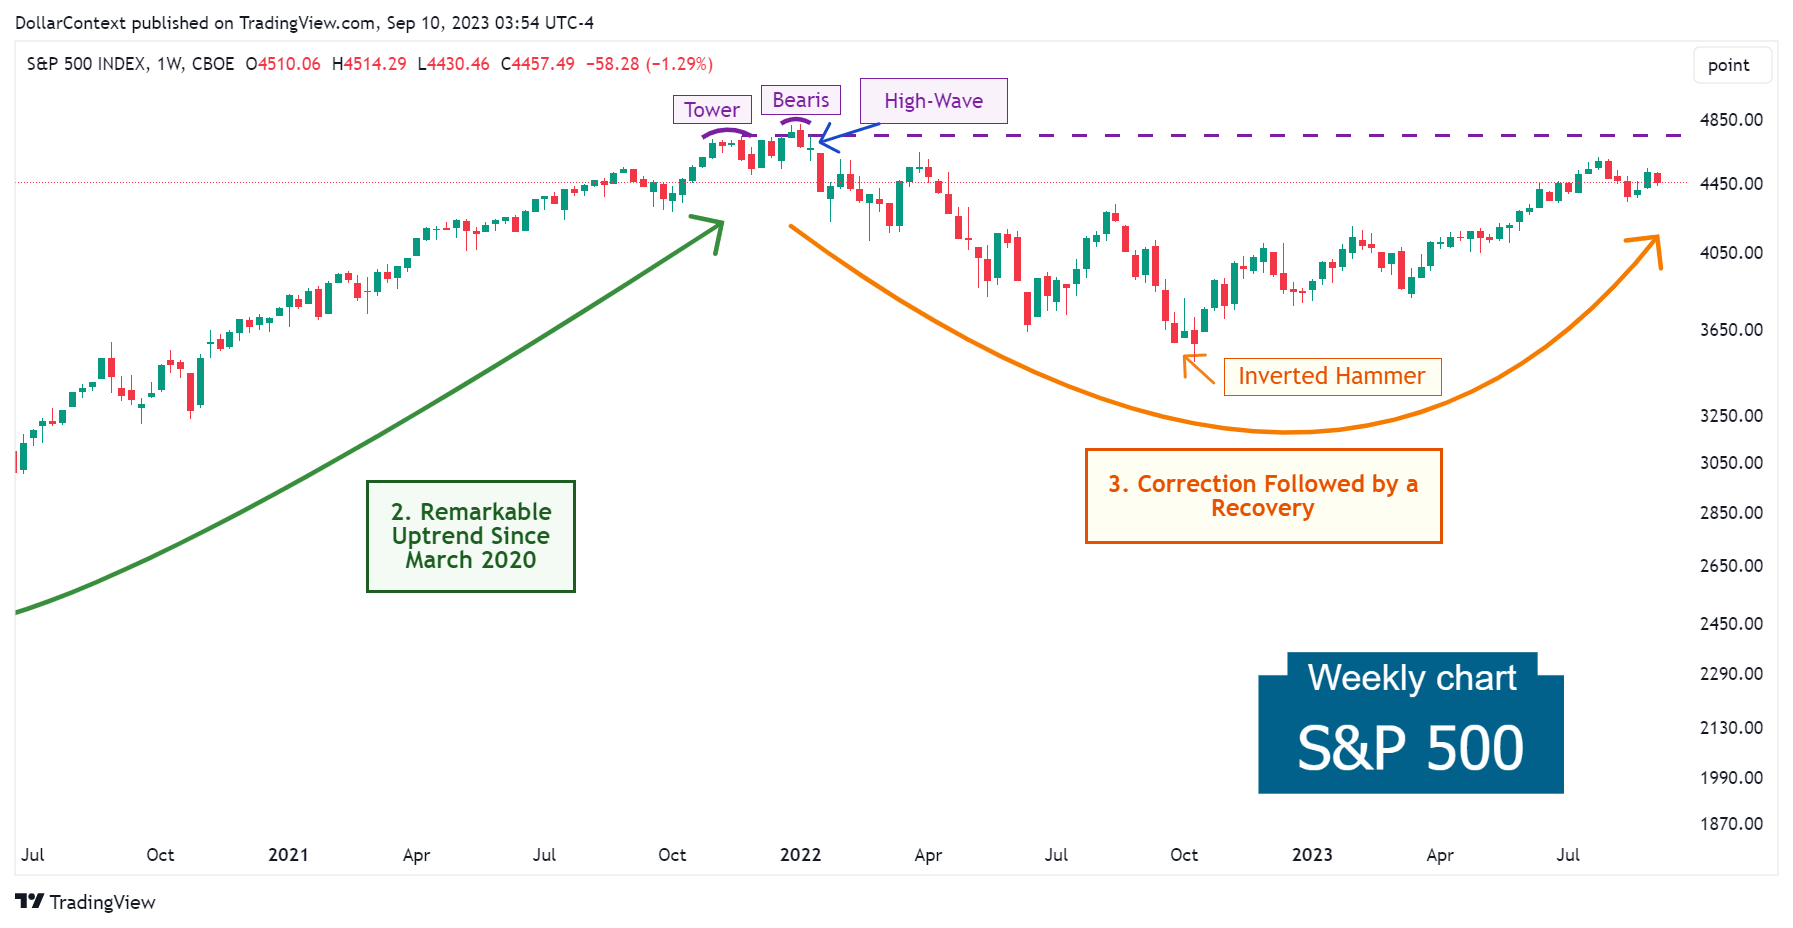 S&P 500: The Decline and Subsequent Return to the Highs (Weekly Chart)